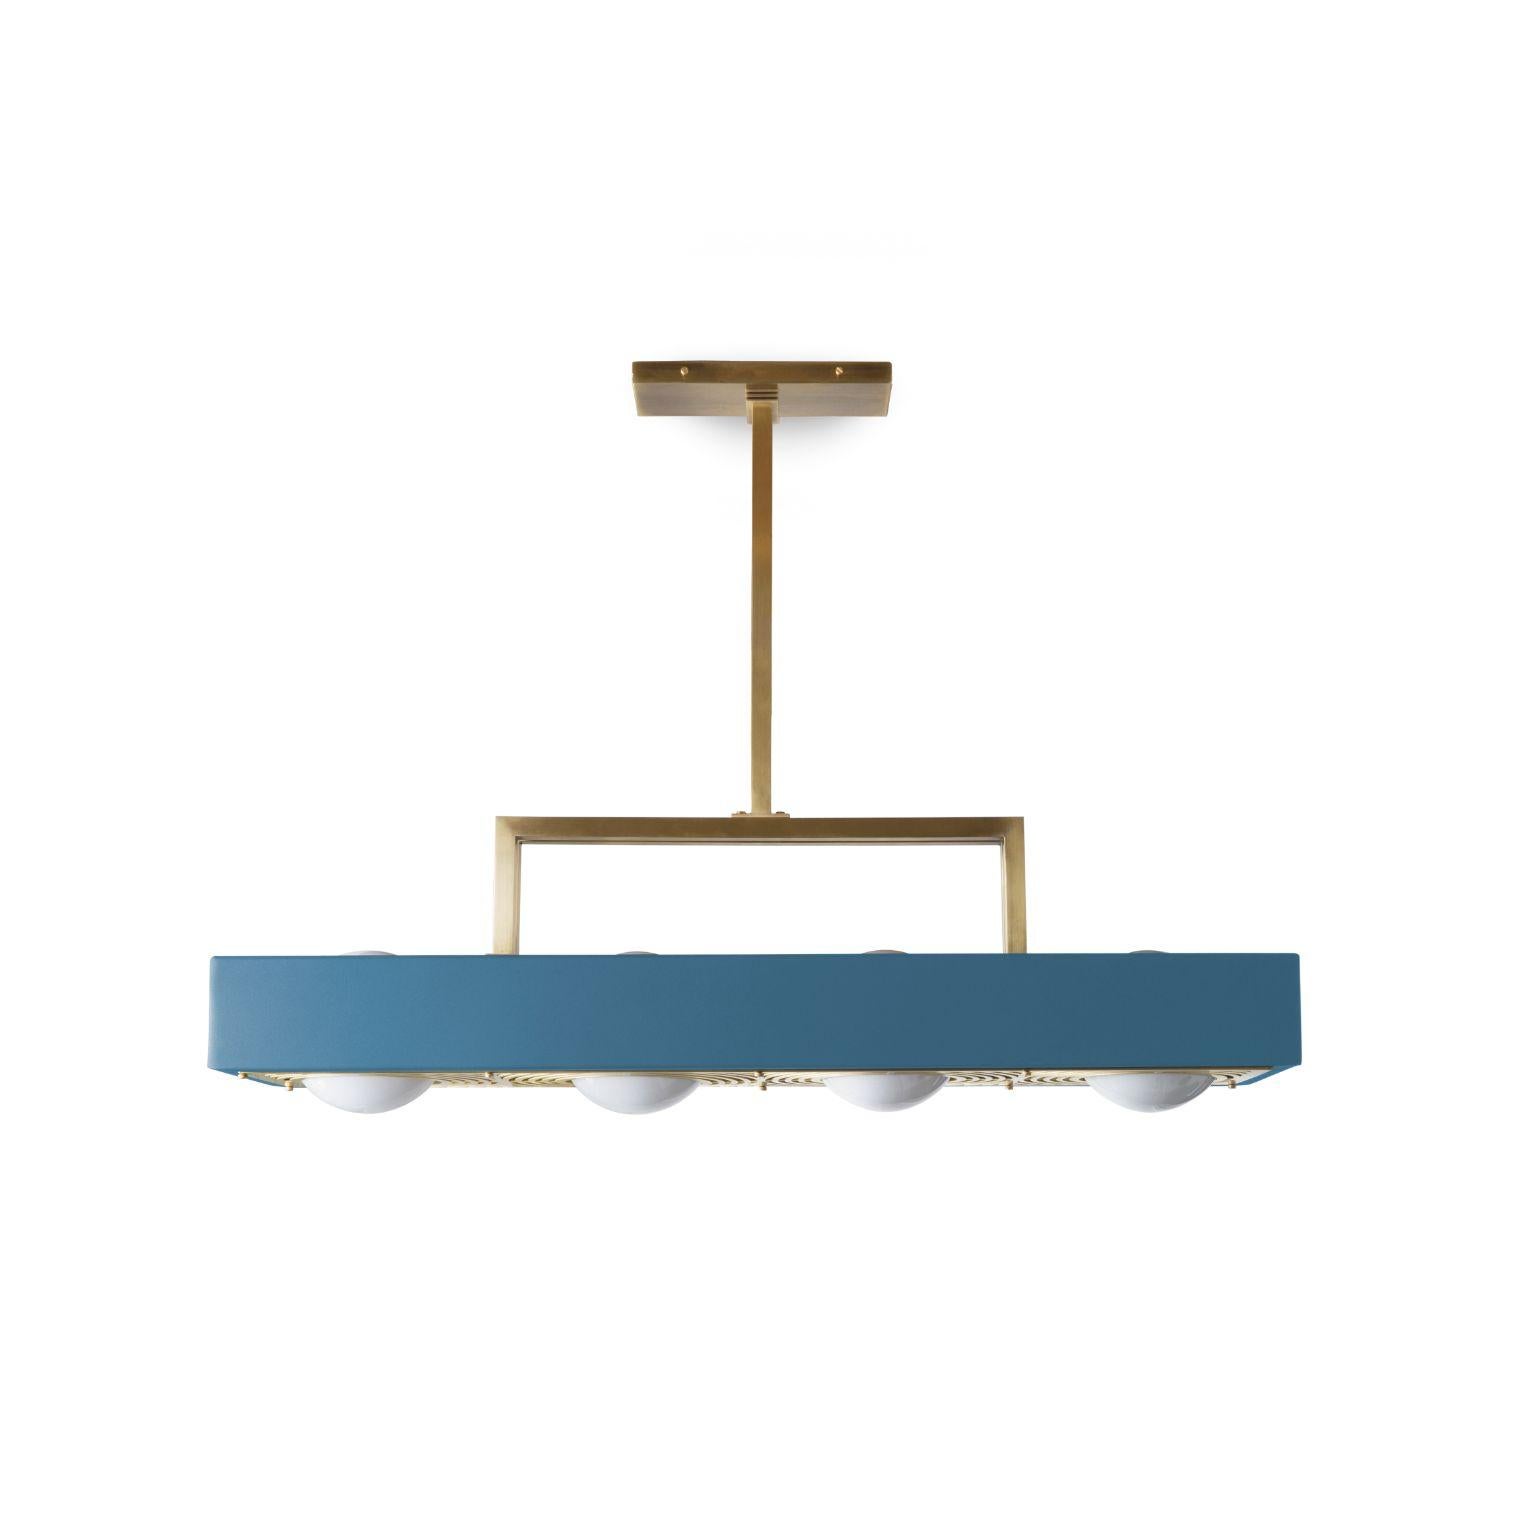 Kernel pendant light, blue by Bert Frank
Dimensions: 18.5 (only lamp) x 80 x 20 cm
Materials: Brass, steel

Also available: in white and black.

When Adam Yeats and Robbie Llewellyn founded Bert Frank in 2013 it was a meeting of minds and the start